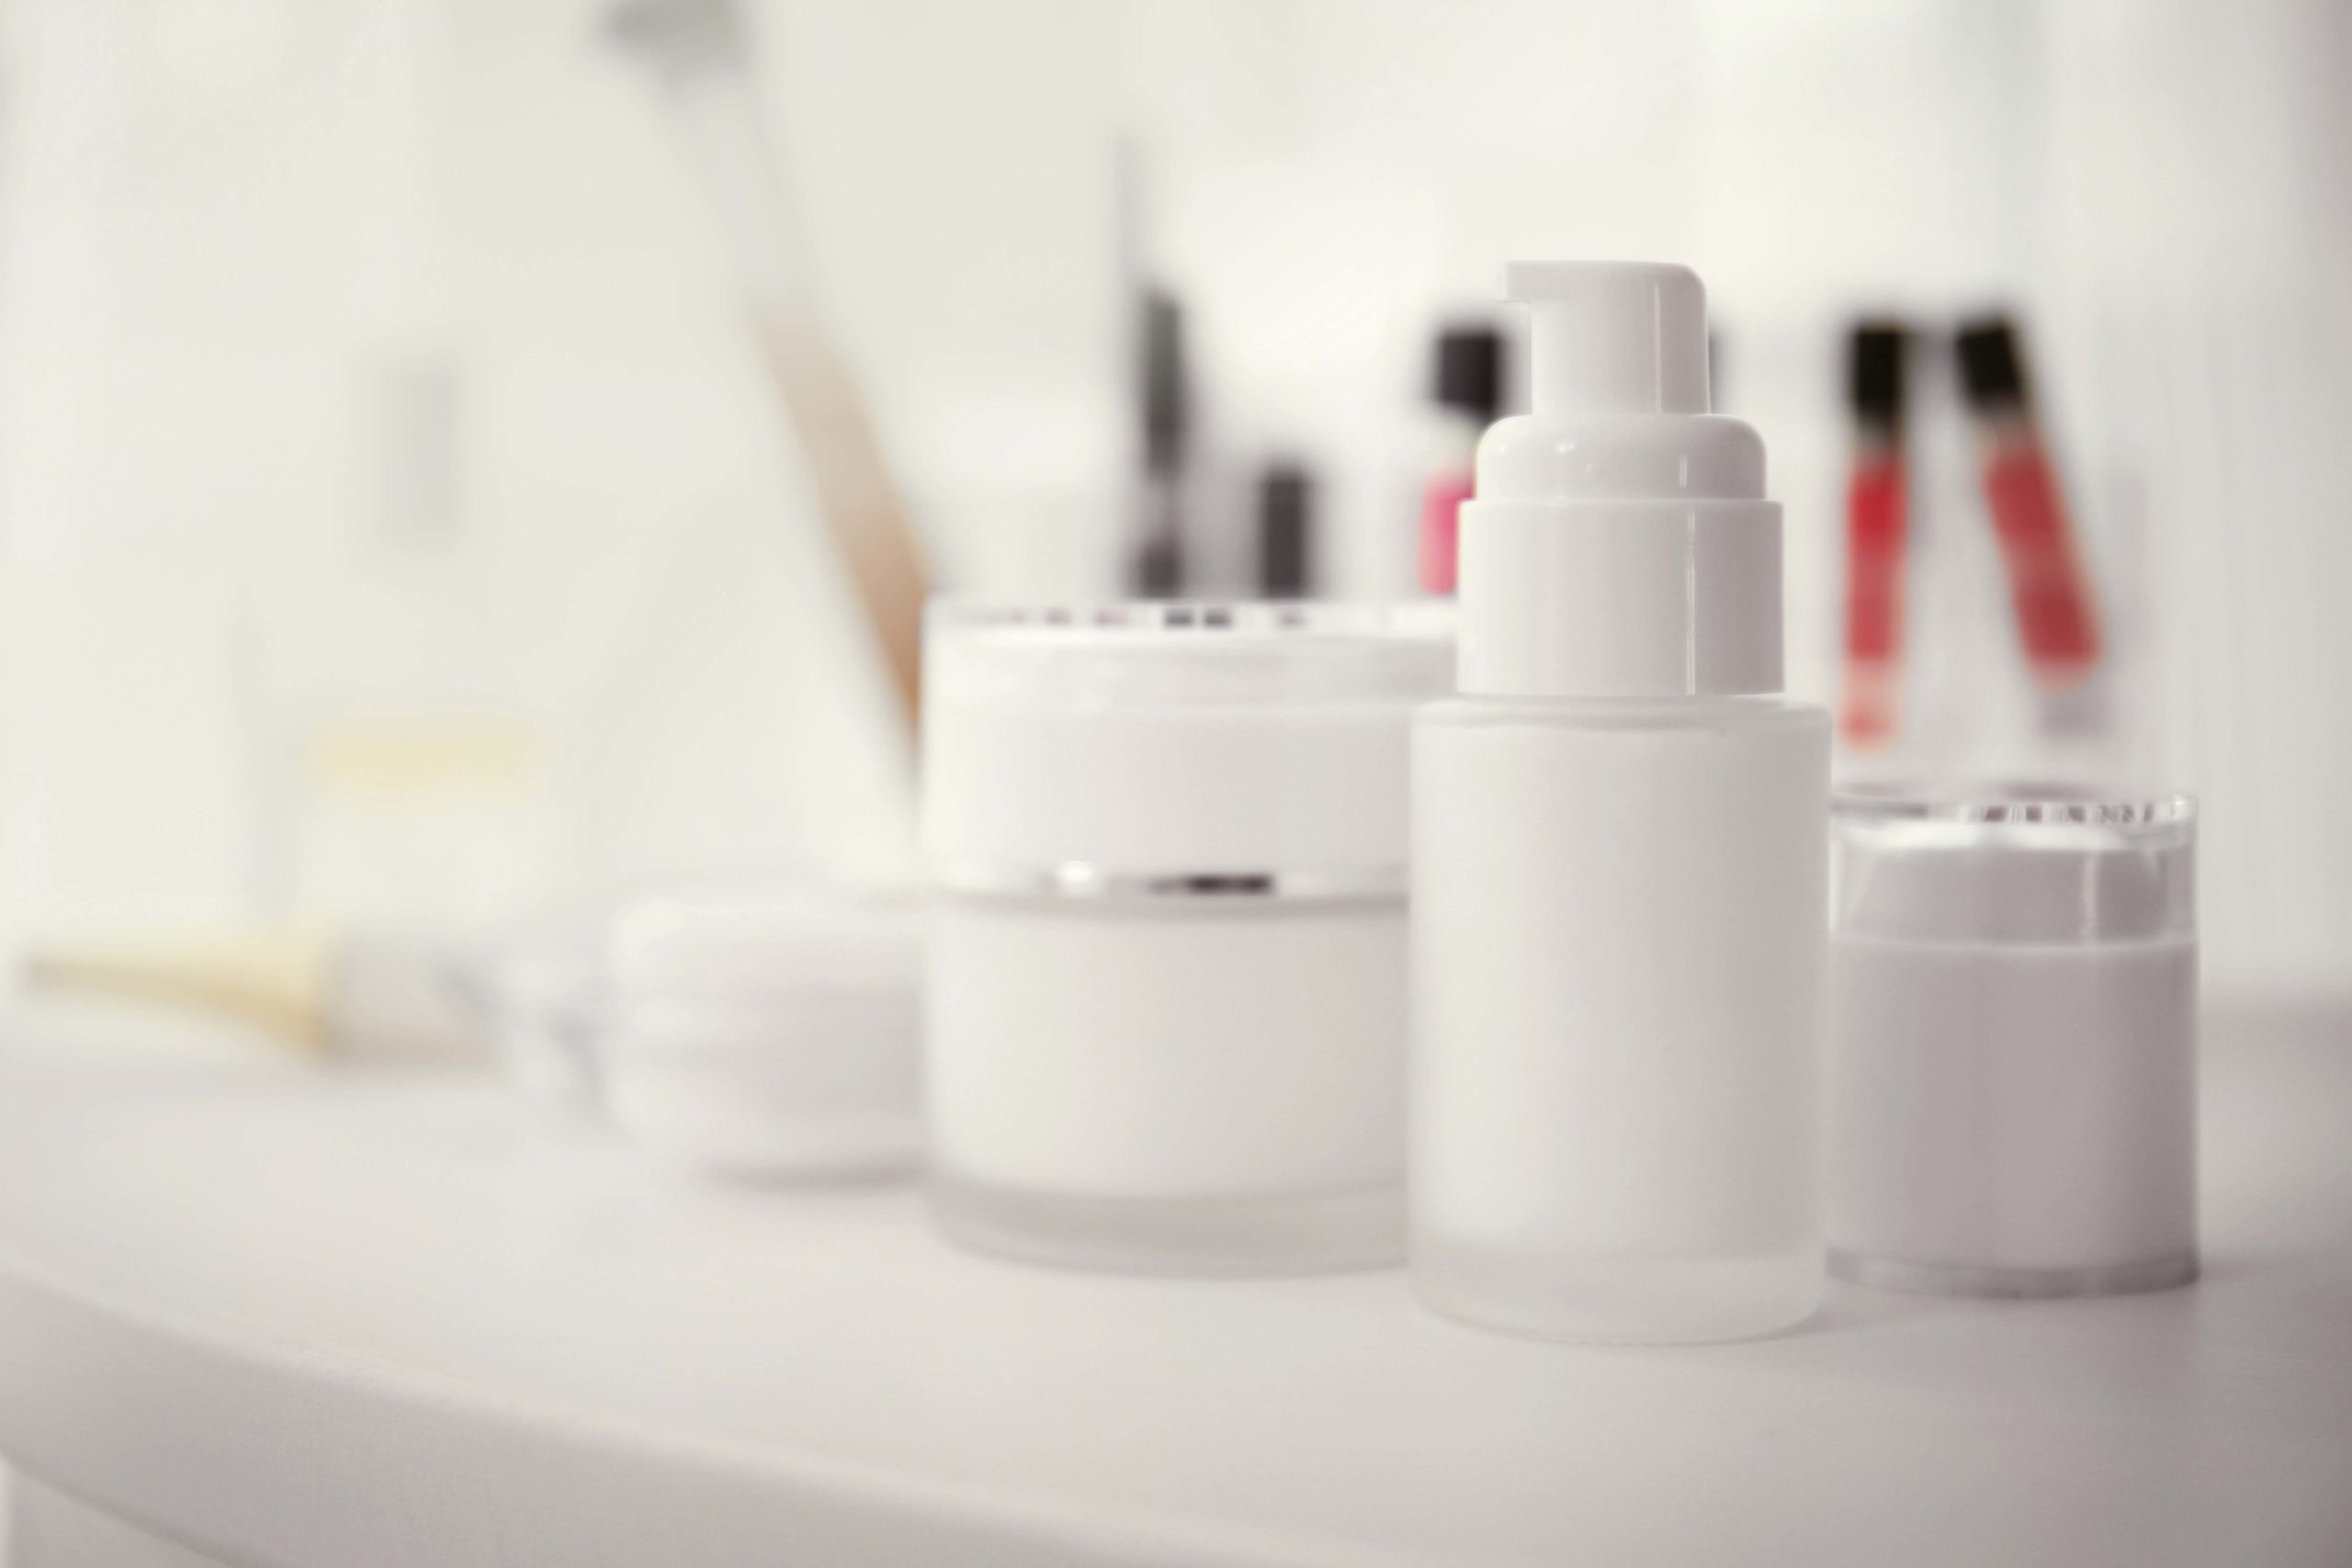 Private Labeling 101: What You Need to Know to Launch Your Own Successful Beauty Product Line